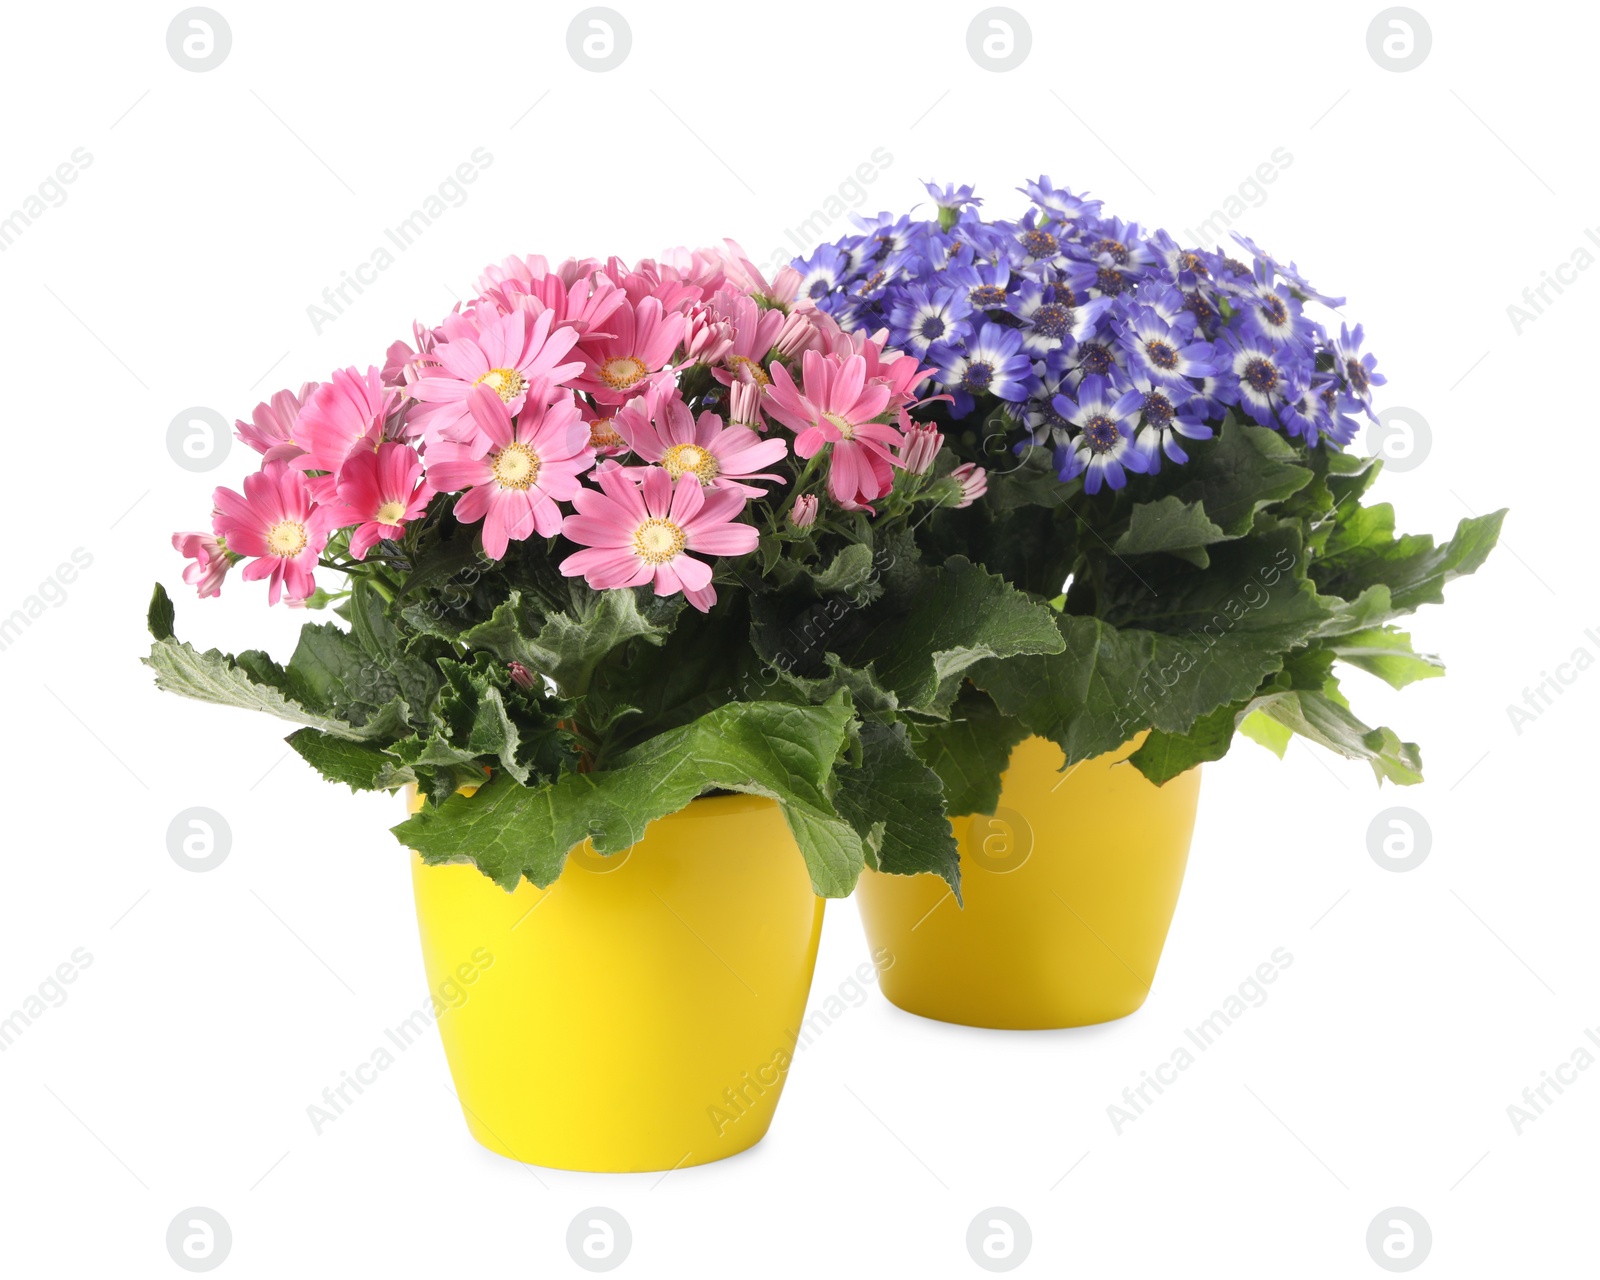 Photo of Different cineraria plants in flower pots on white background